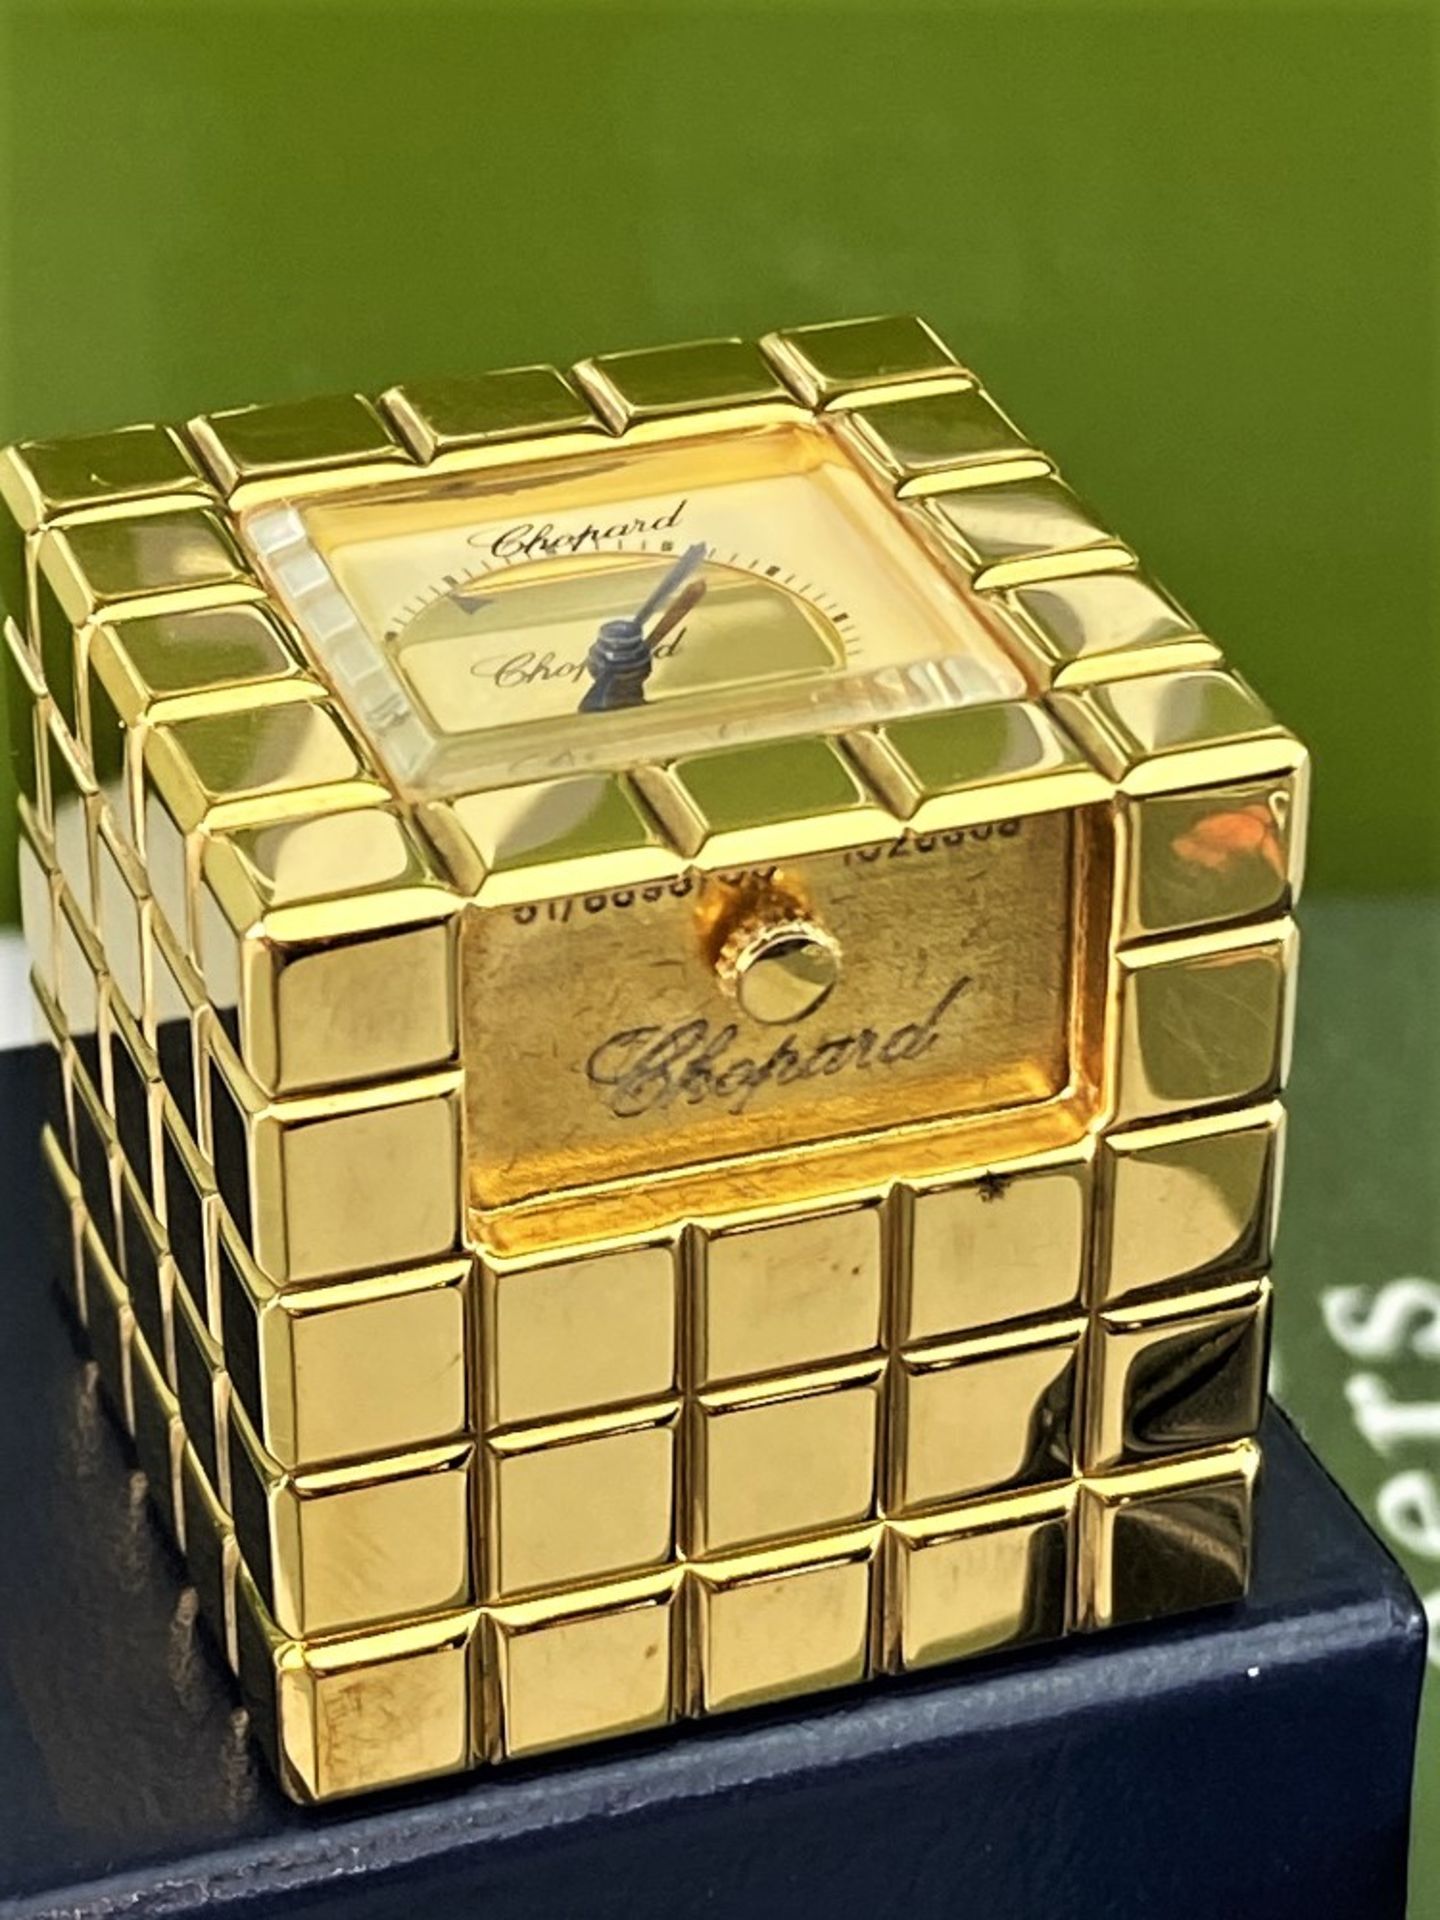 Chopard Ice Cube Travel / Desk Clock Gold/Champagne Edition - Image 3 of 8